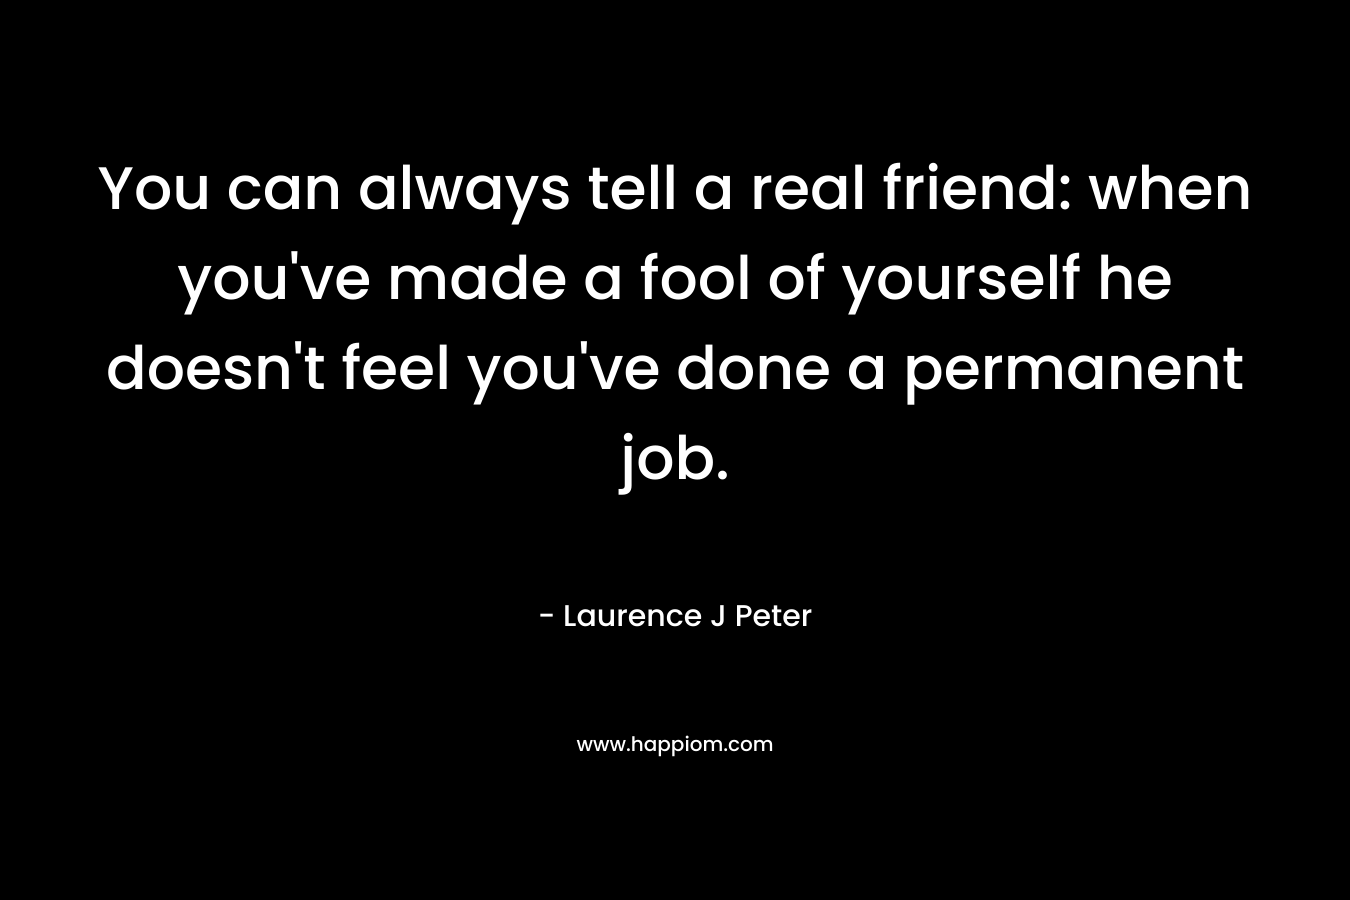 You can always tell a real friend: when you’ve made a fool of yourself he doesn’t feel you’ve done a permanent job. – Laurence J Peter